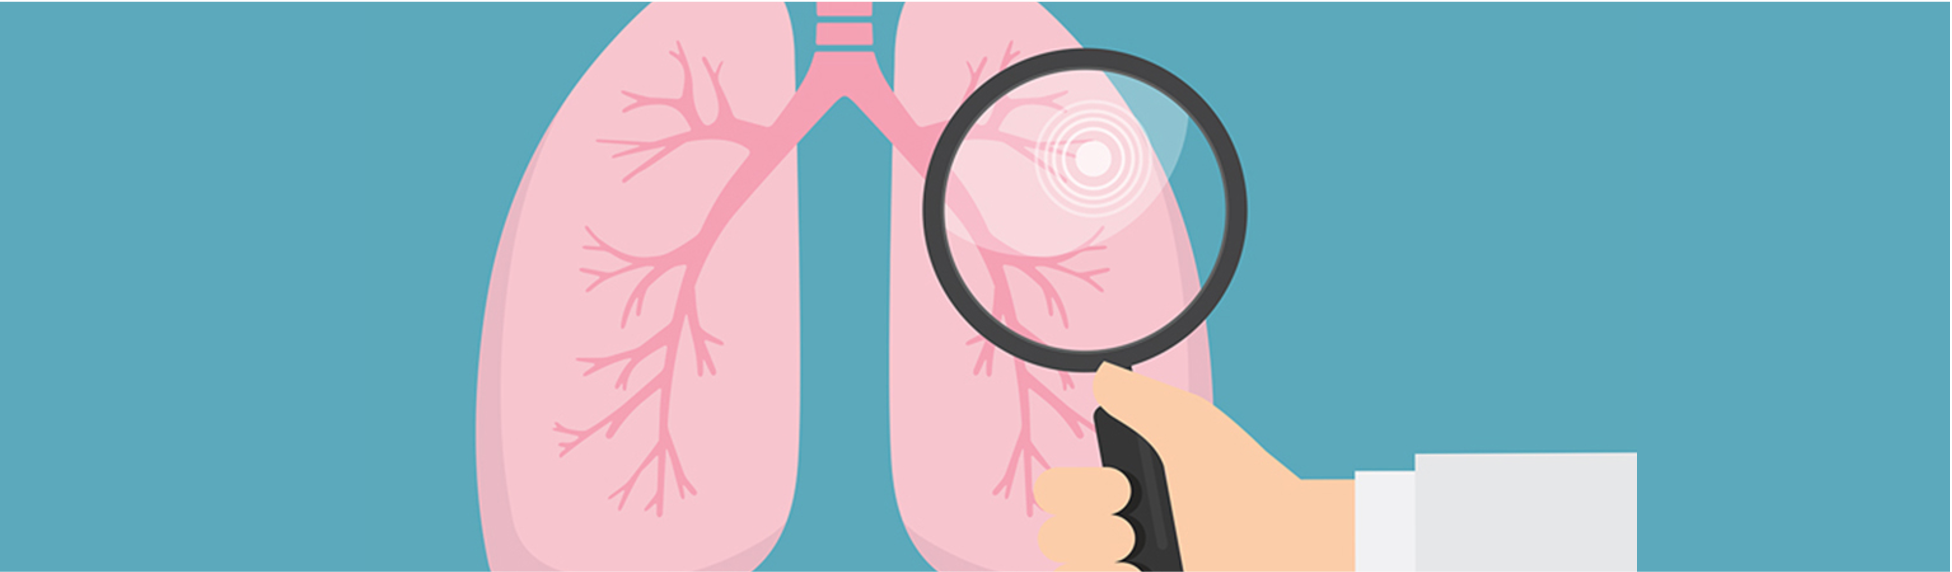 Illustration of magnifying glass in front of lungs